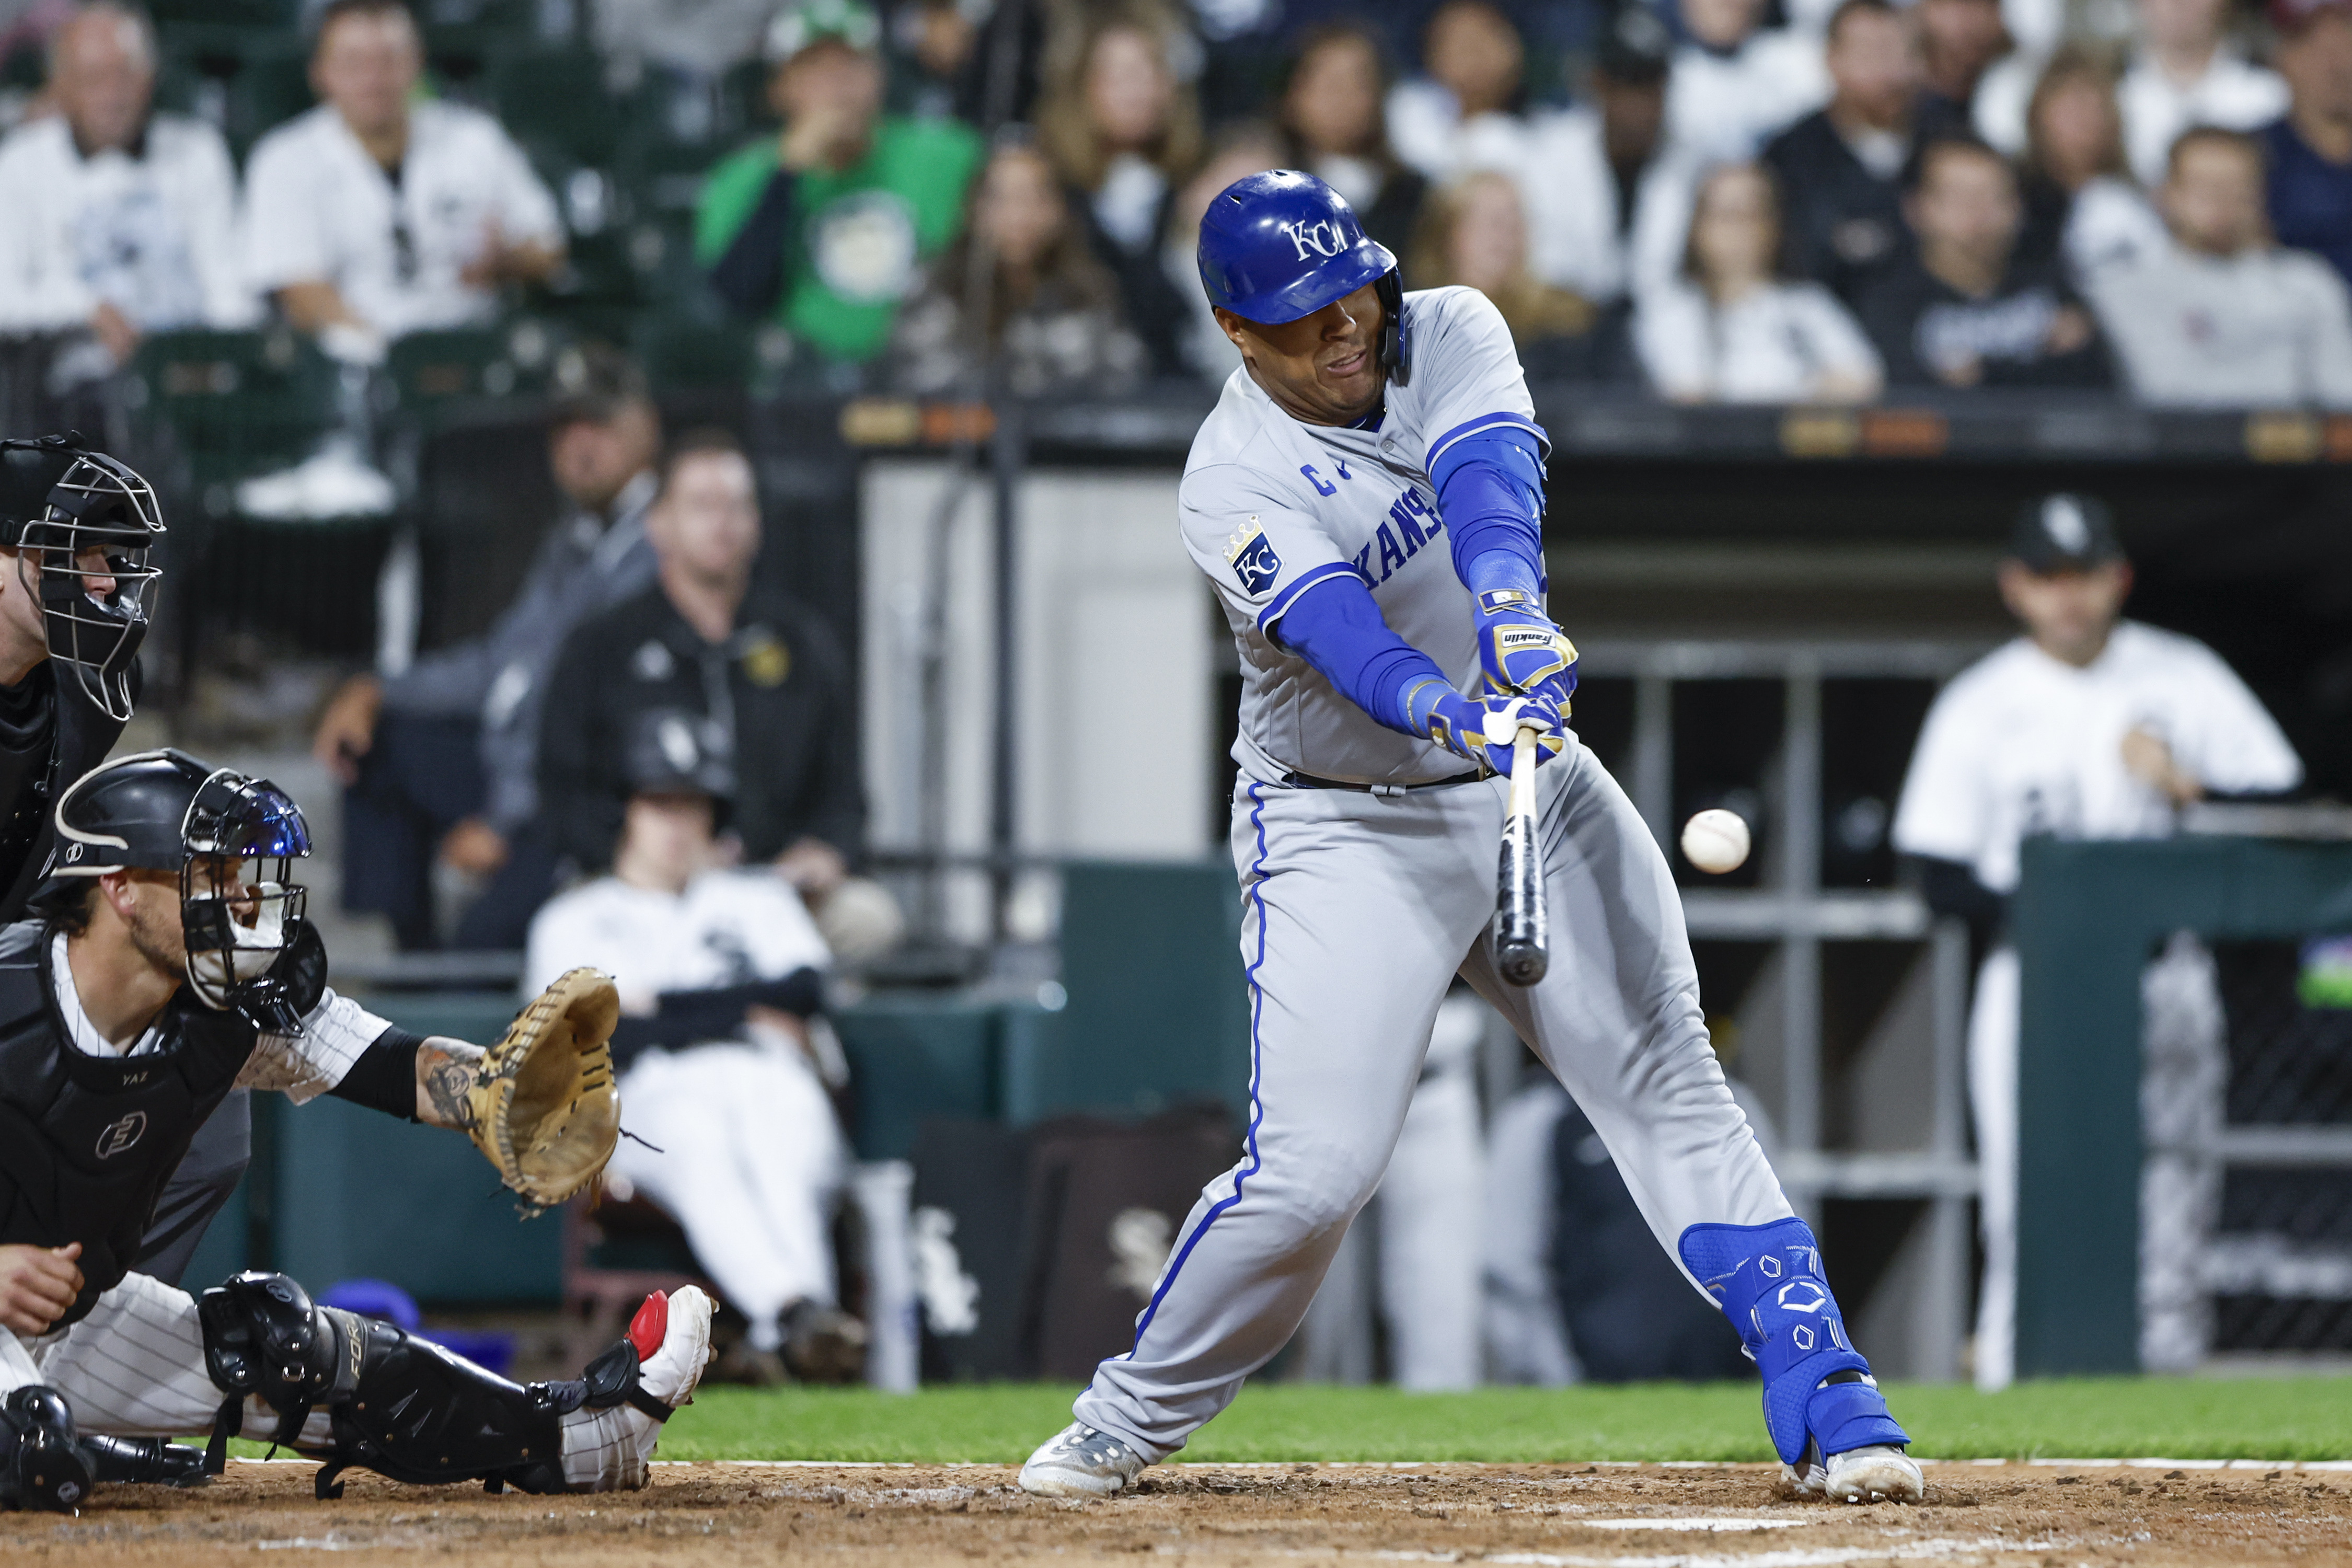 Massey hits third homer of series but Royals can't avoid being